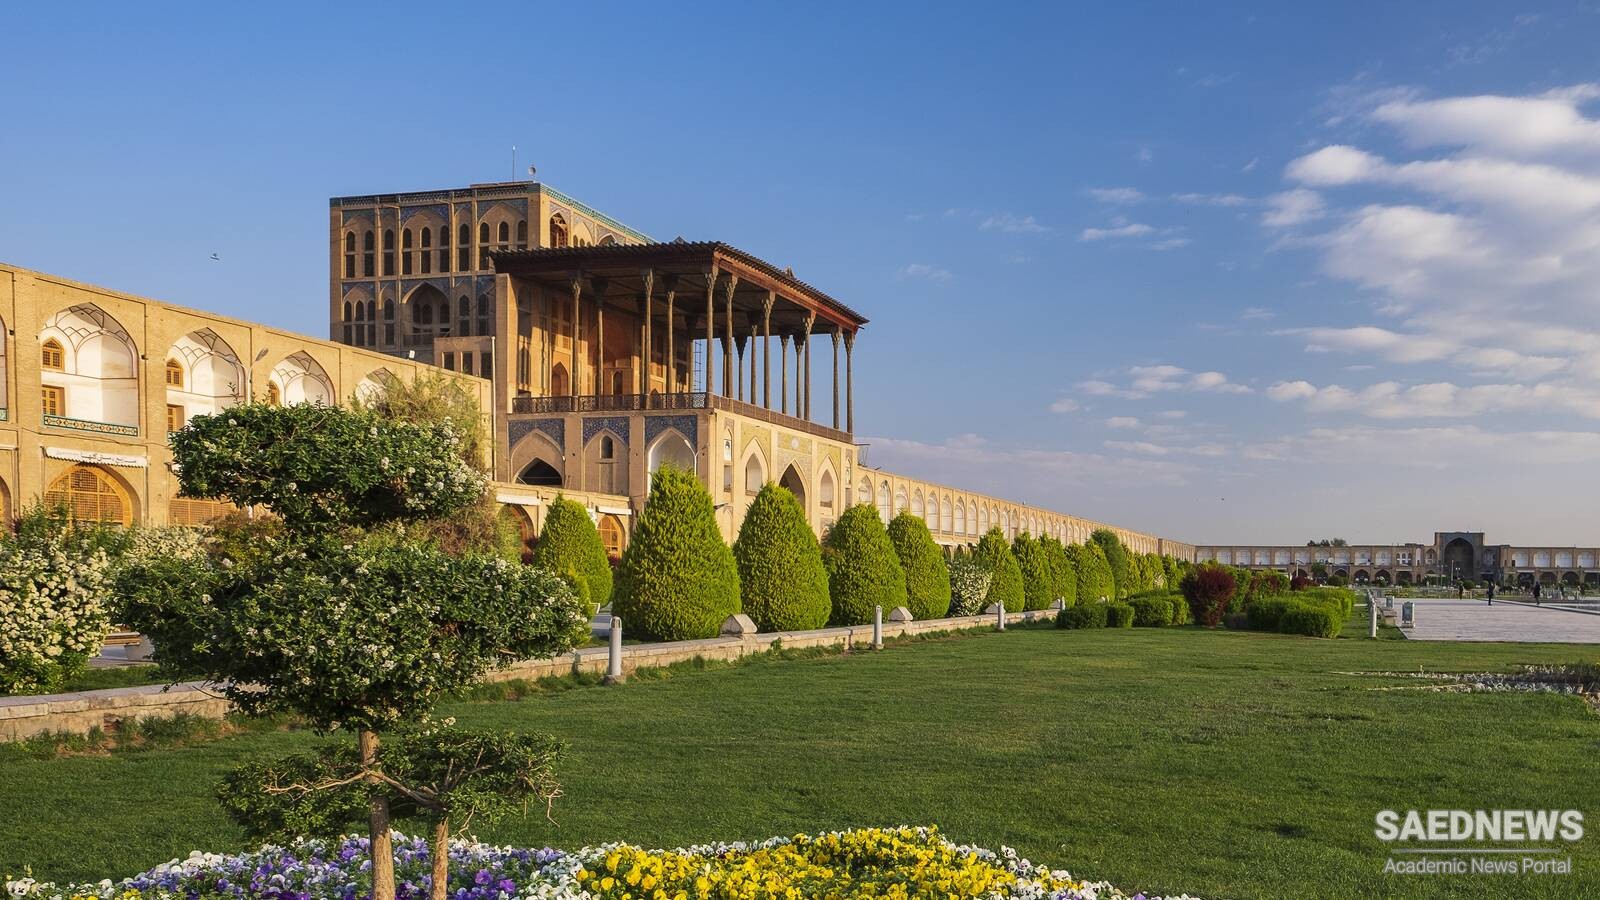 Capital of Persian Architecture and Art